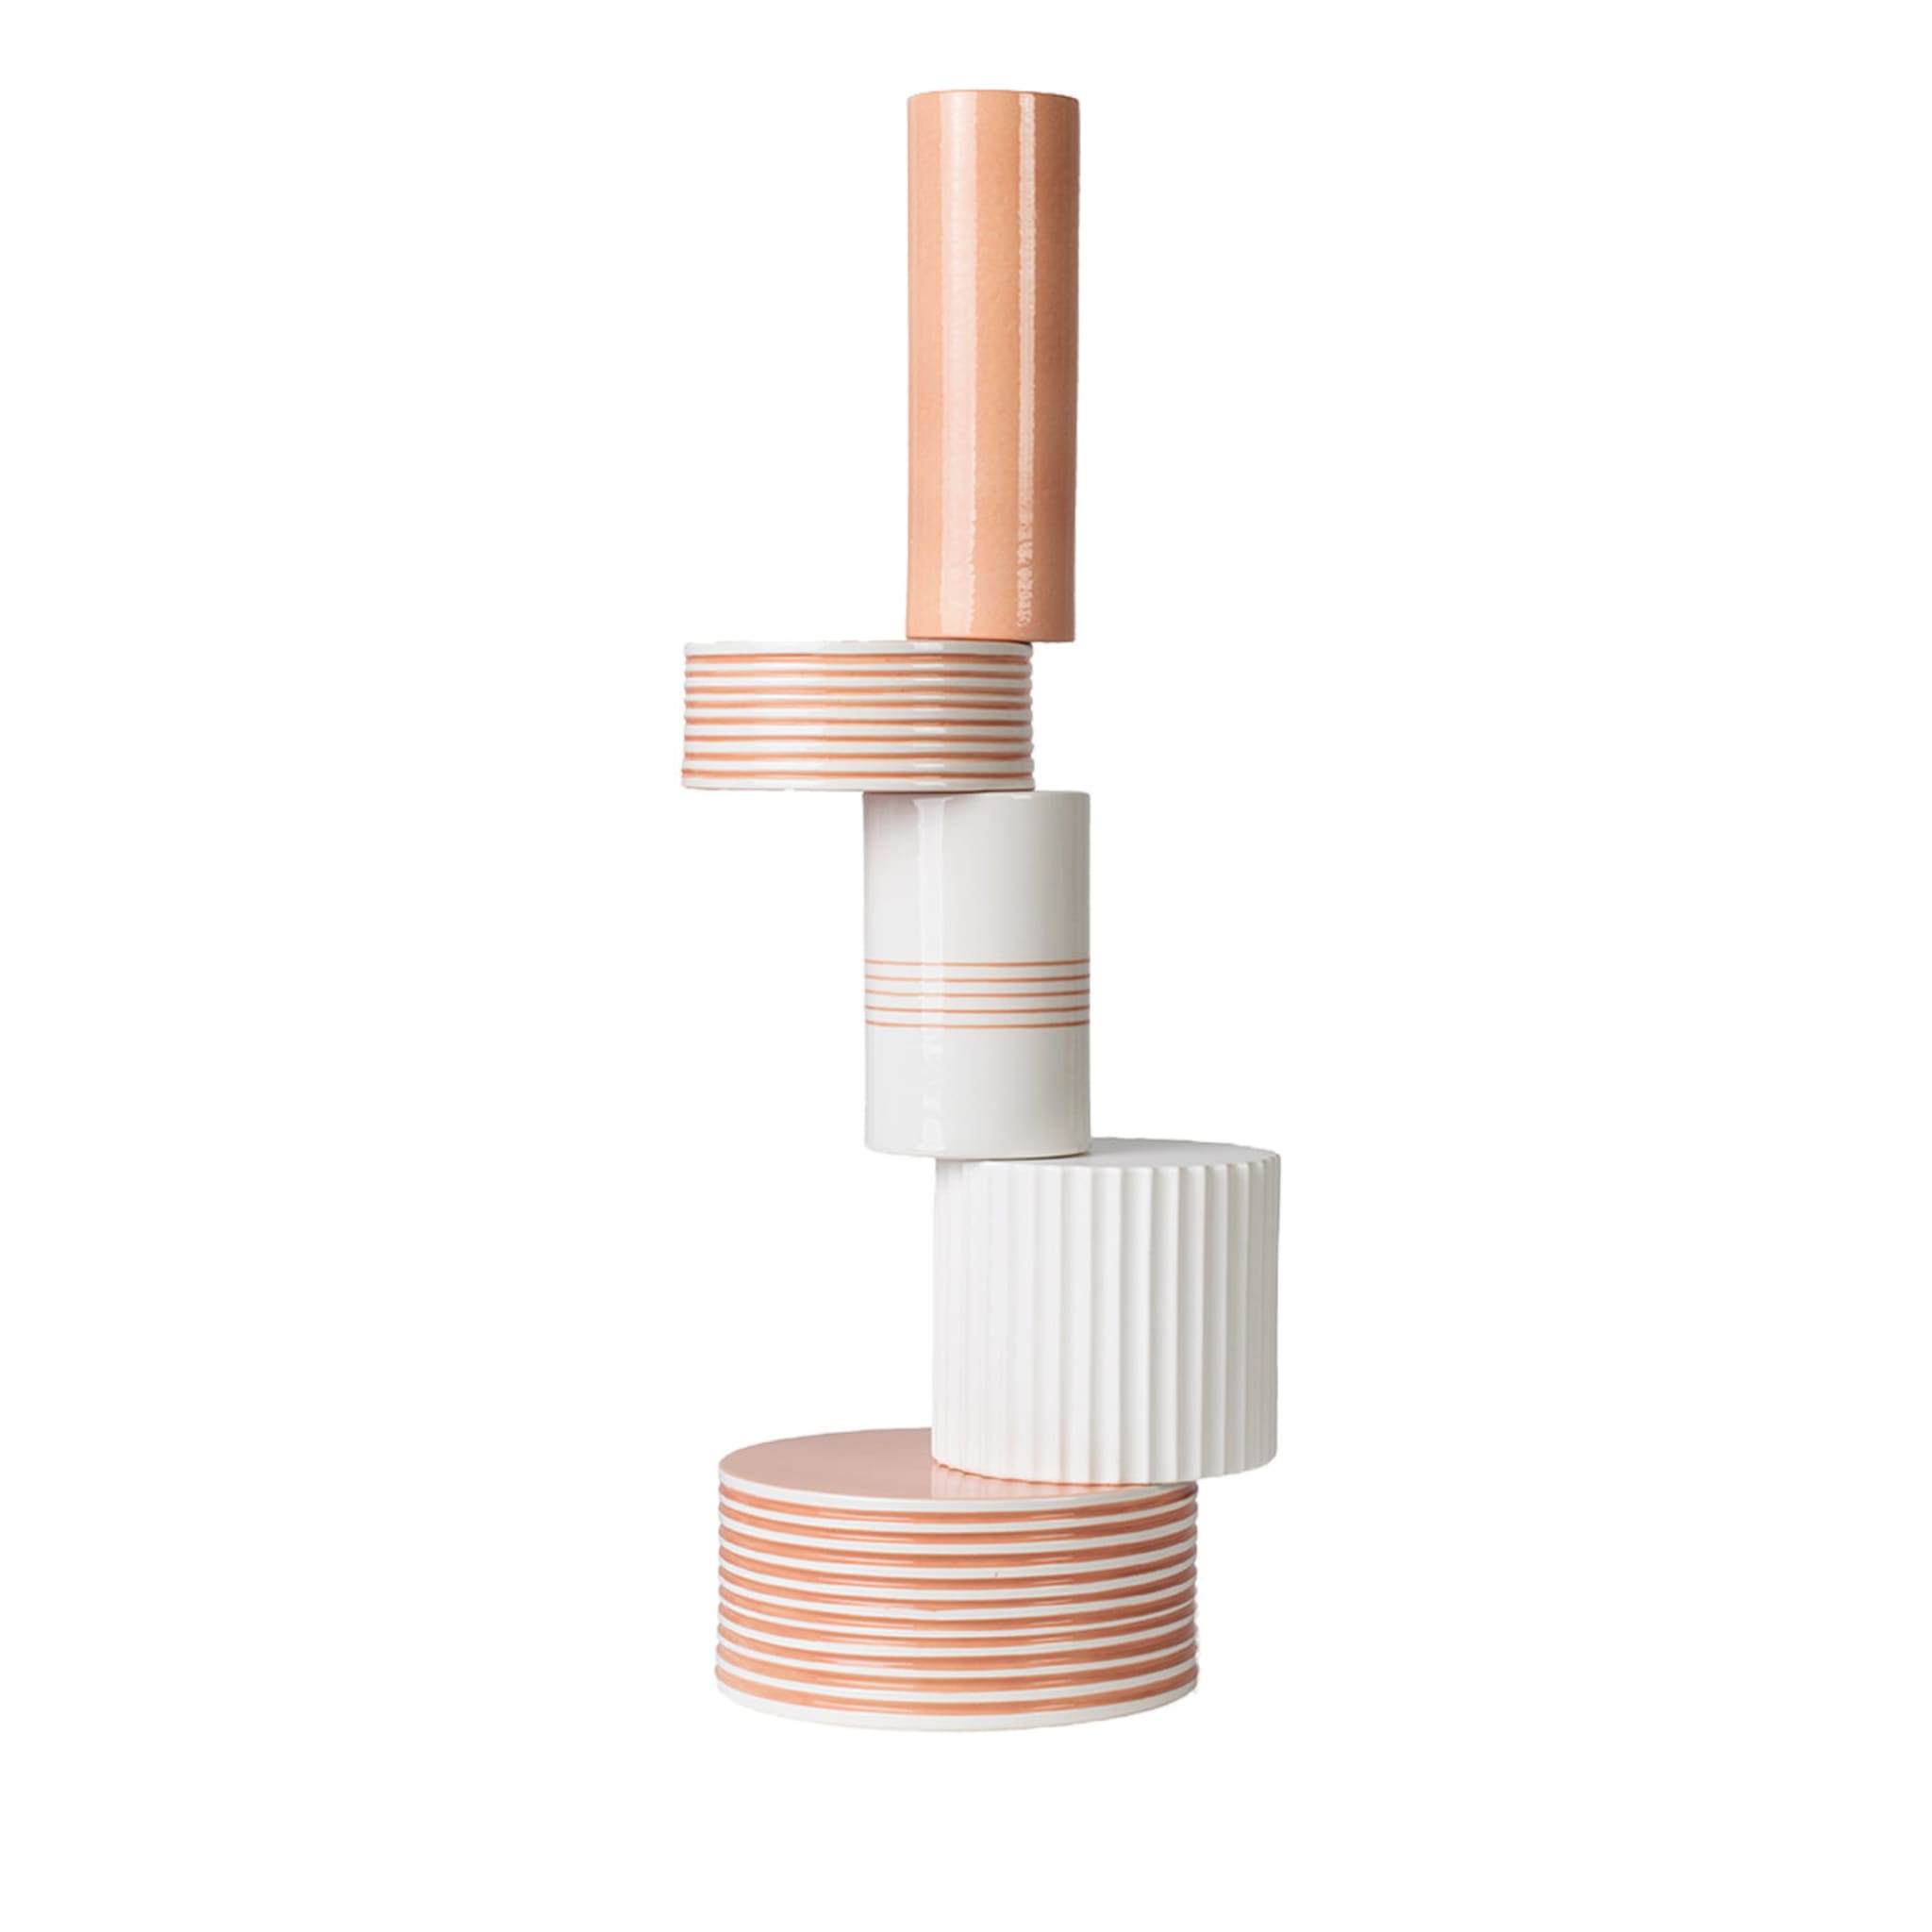 5-Element White and Terracotta Vase by Quincoces-Dragò  - Main view